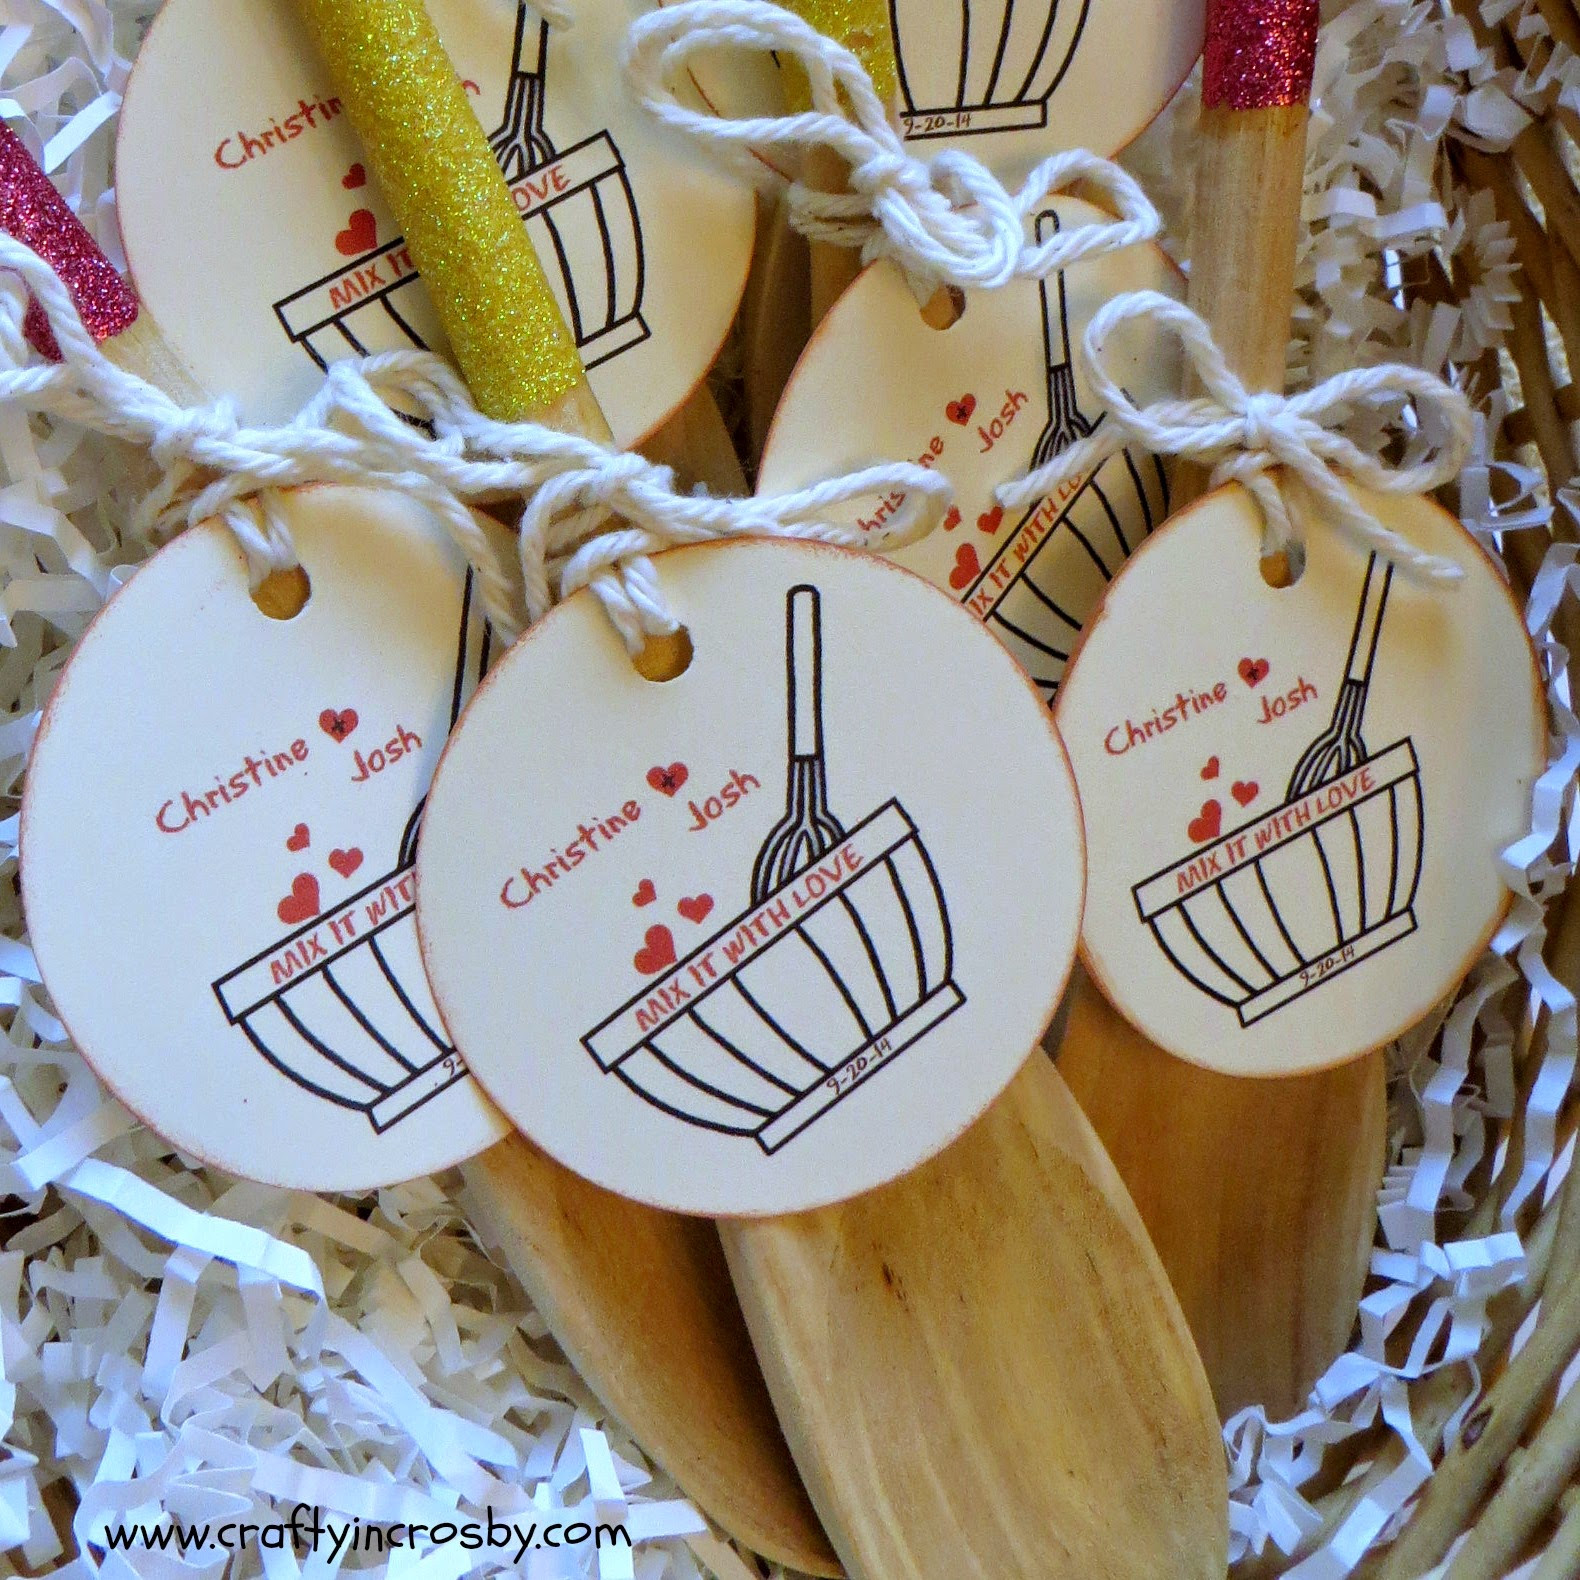 Wedding Shower Favors
 Crafty in Crosby Bridal Shower Favors Mix it With Love